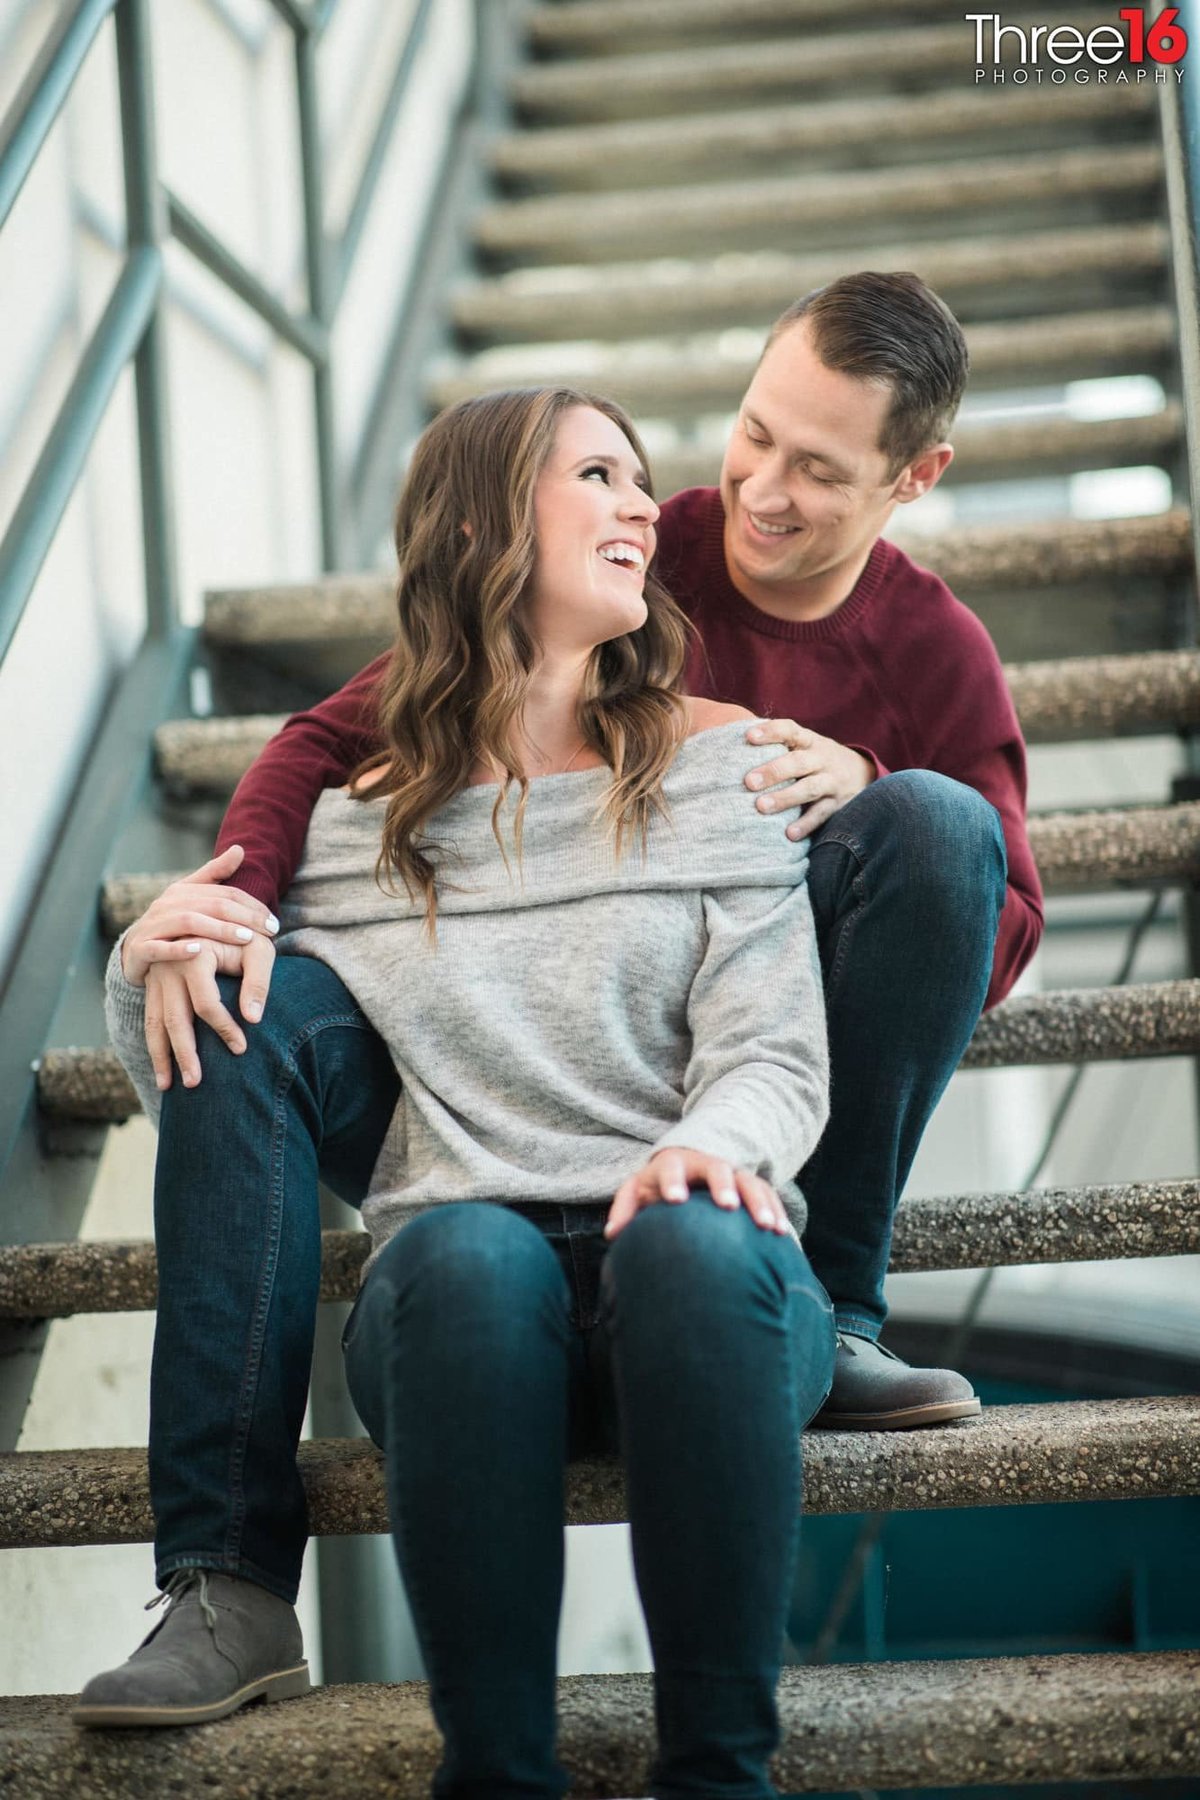 Bride to be looks back at her fiance while sitting together on some stairs